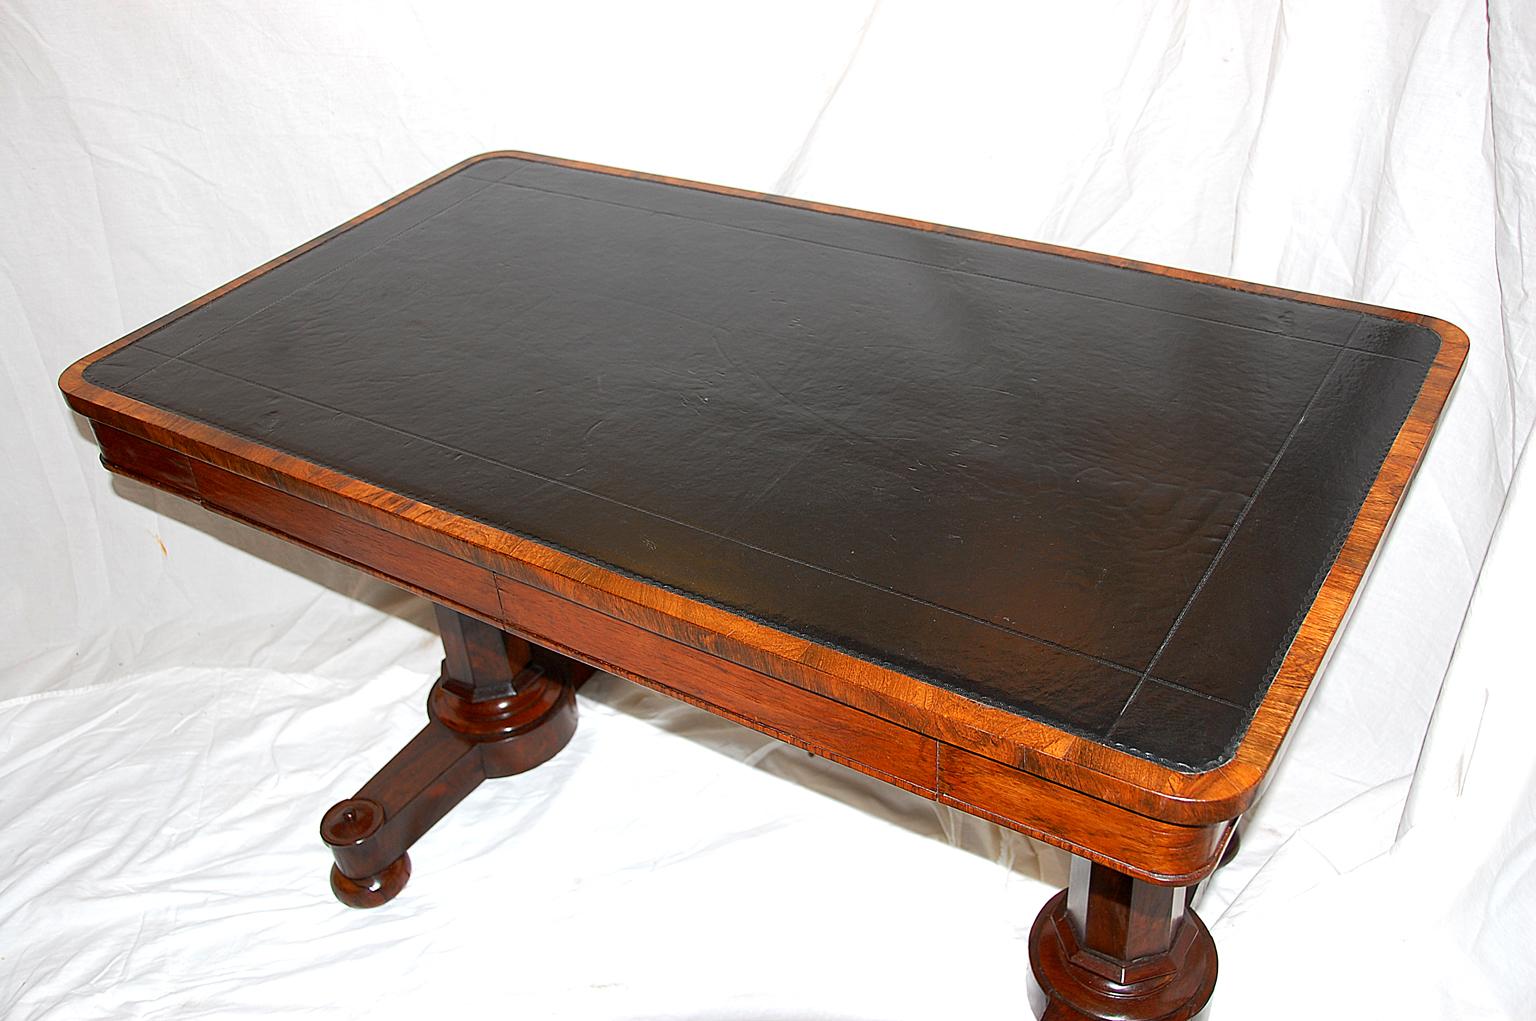 English William IV period rosewood pedestal writing table with old inlaid blind tooled leather writing surface in black, two drawers, faceted pedestal supports; circa 1835.